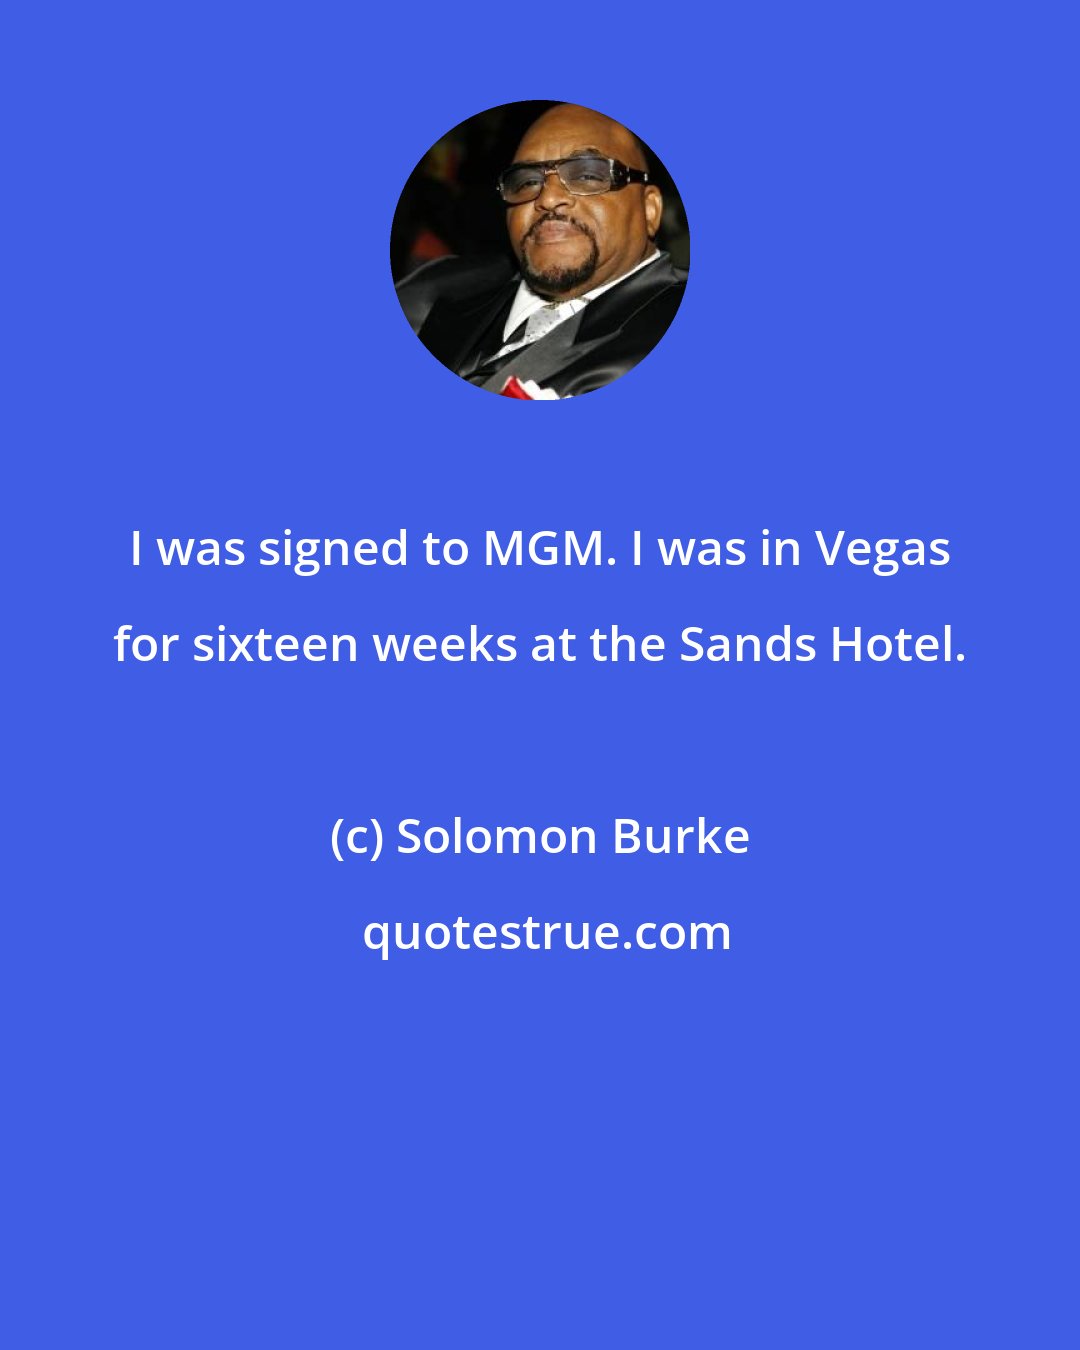 Solomon Burke: I was signed to MGM. I was in Vegas for sixteen weeks at the Sands Hotel.